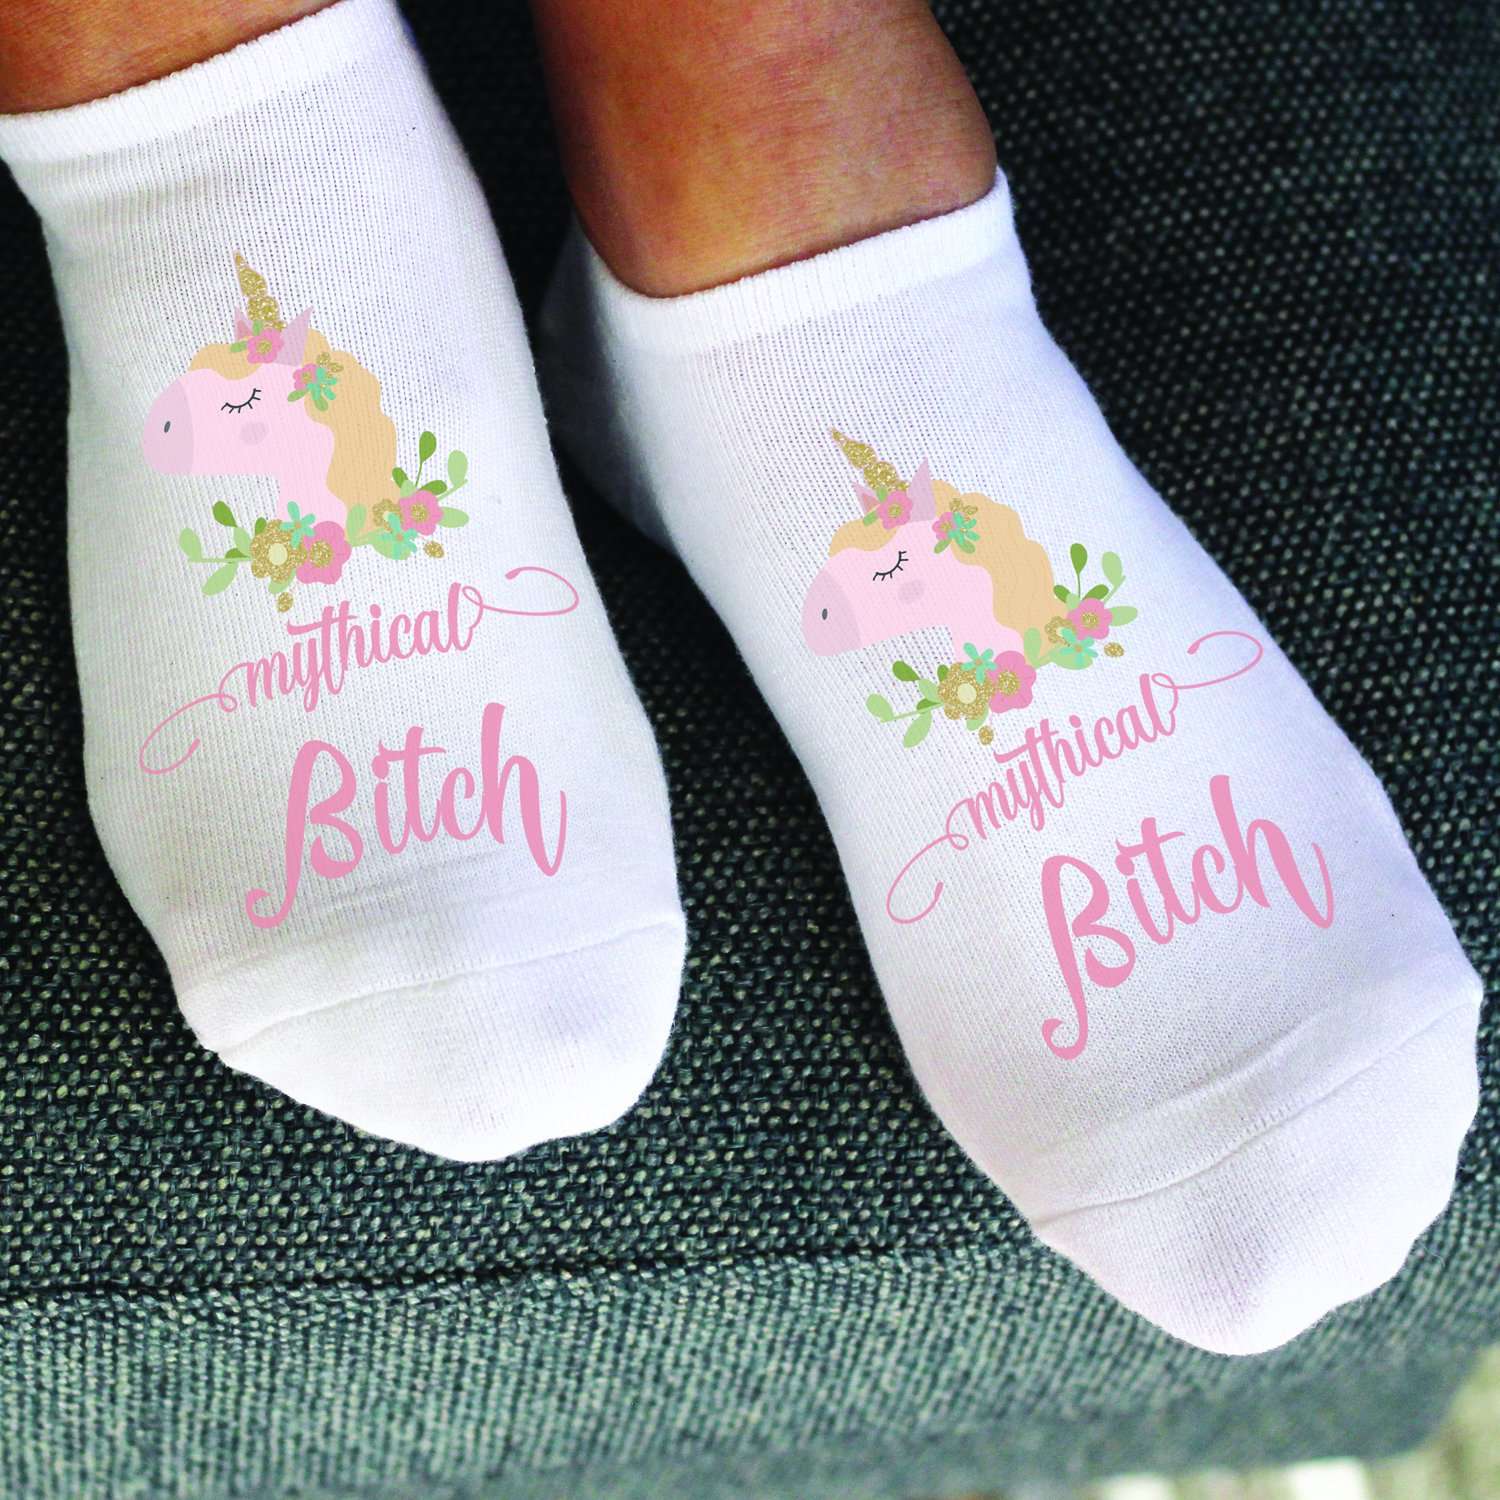 Mythical bitch unicorn design custom printed for all your best friends on soft white cotton no show socks.